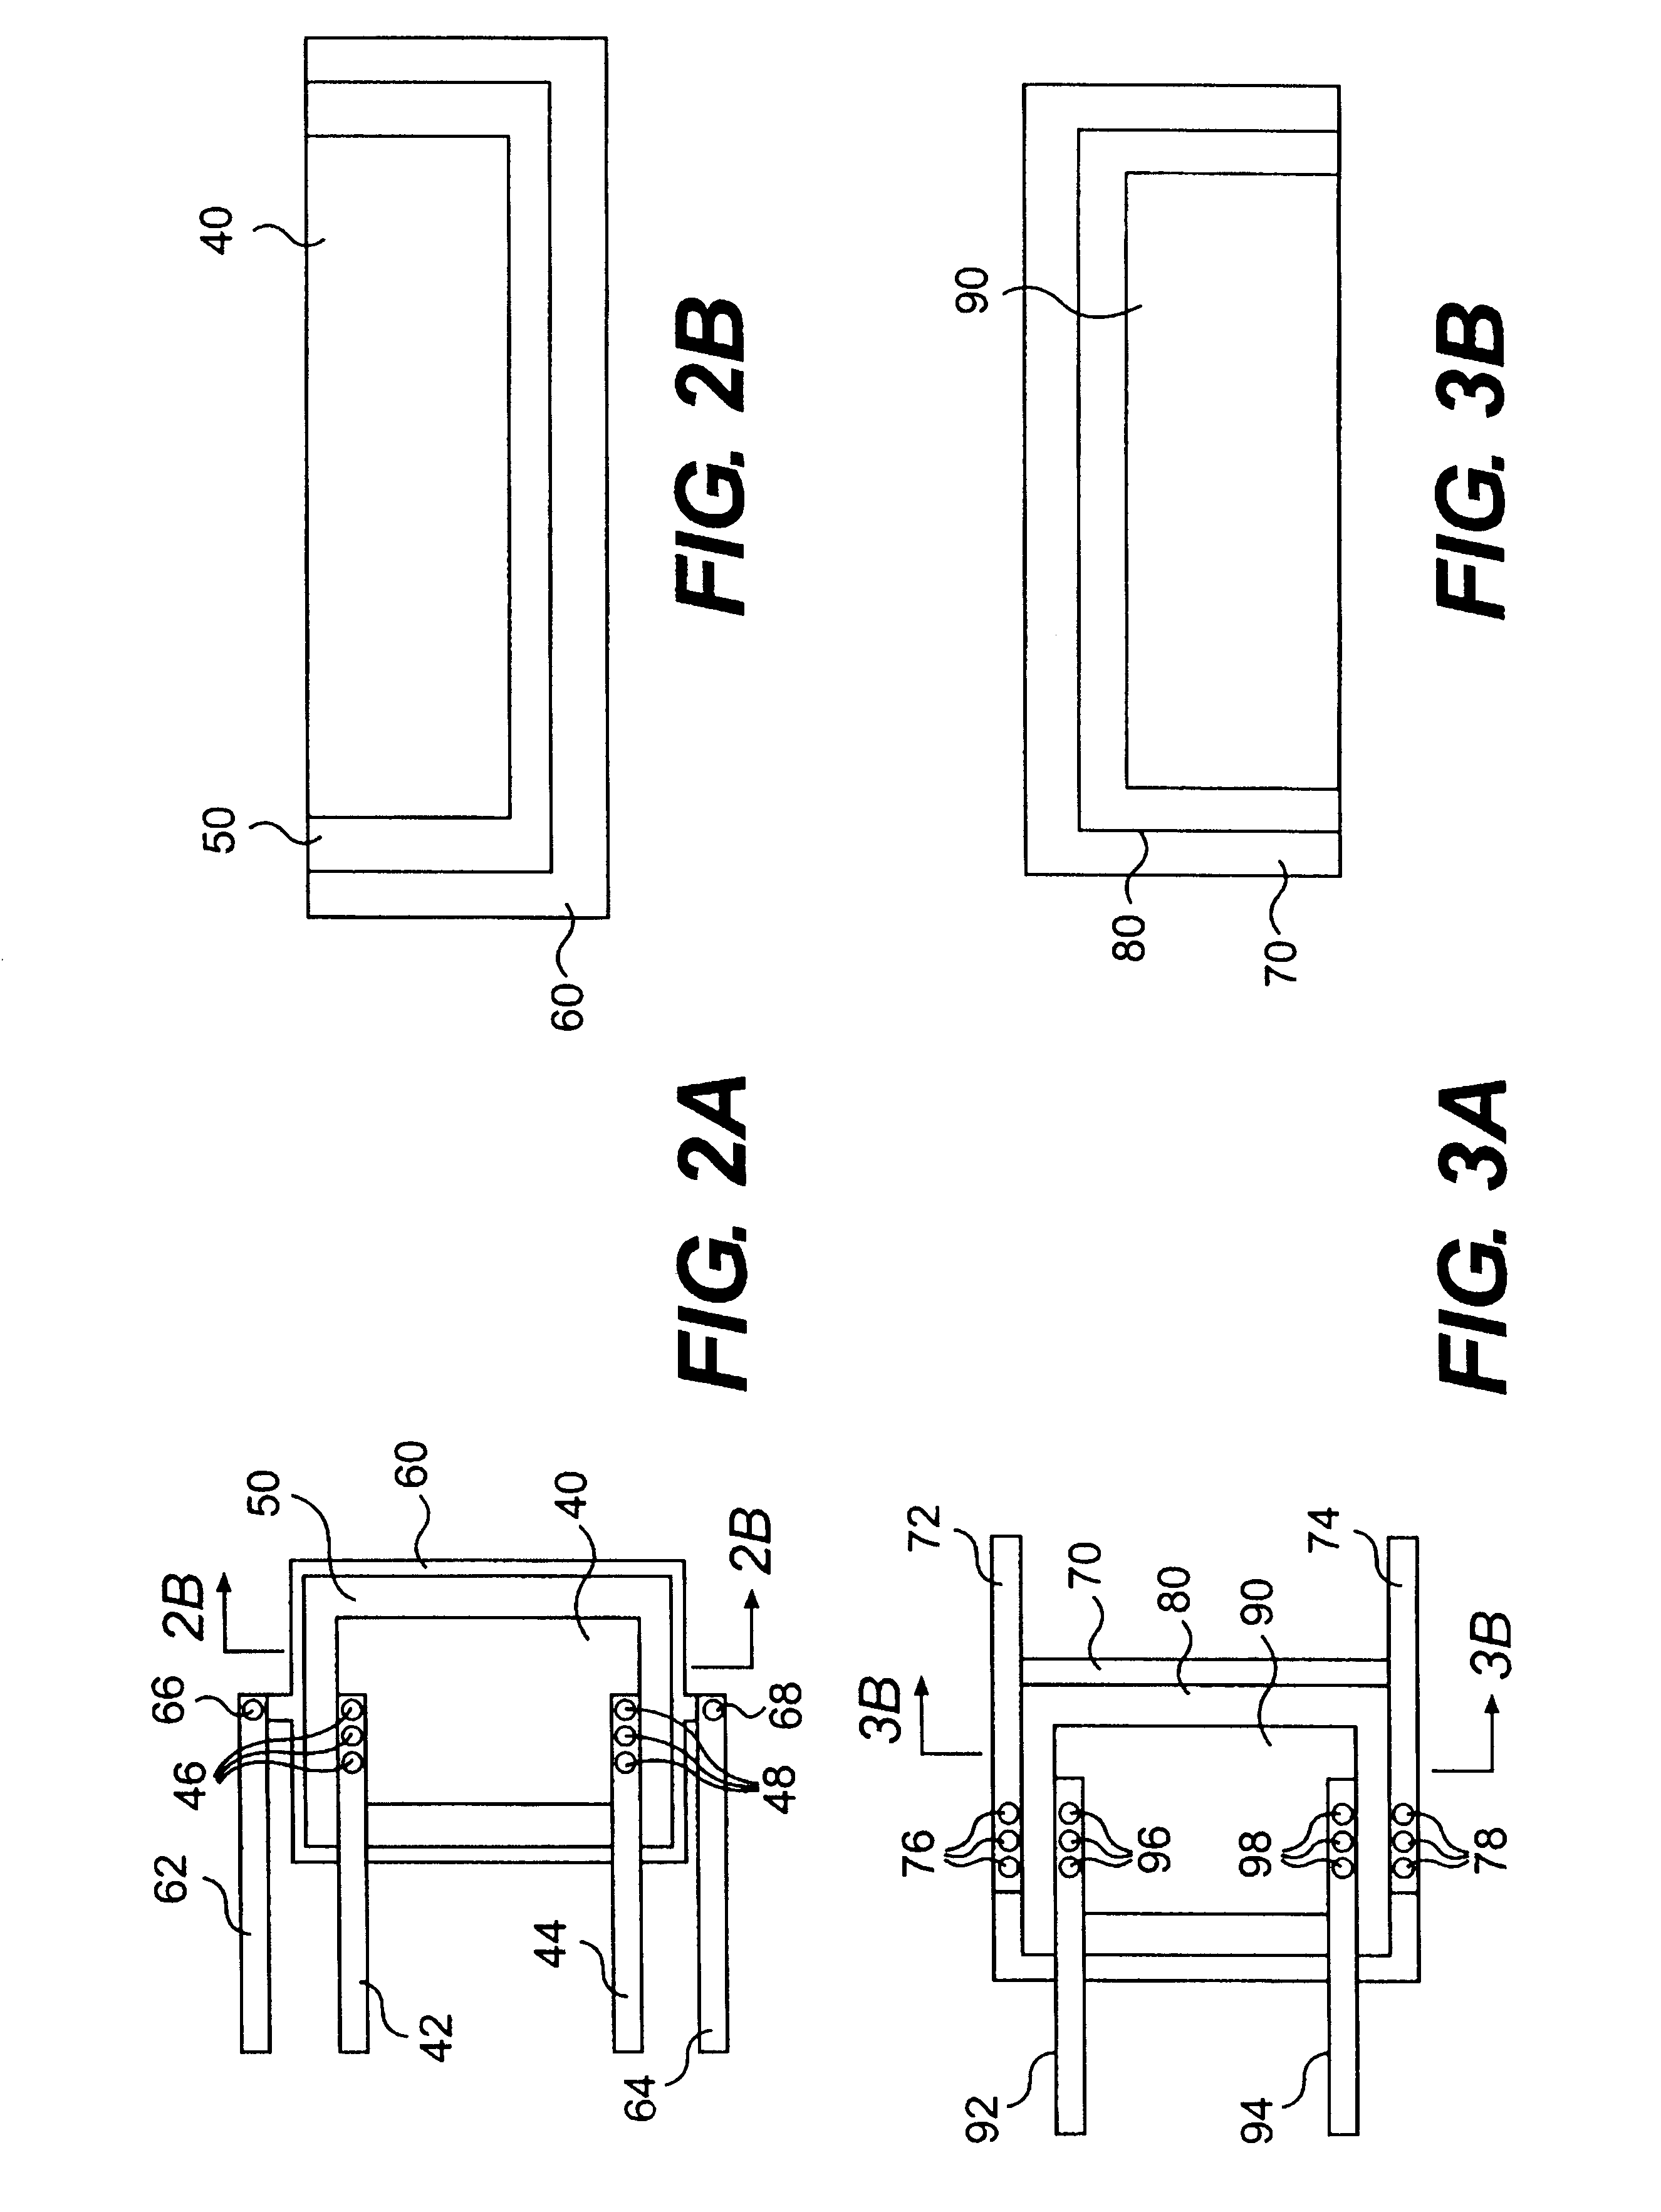 Electrically tunable on-chip resistor